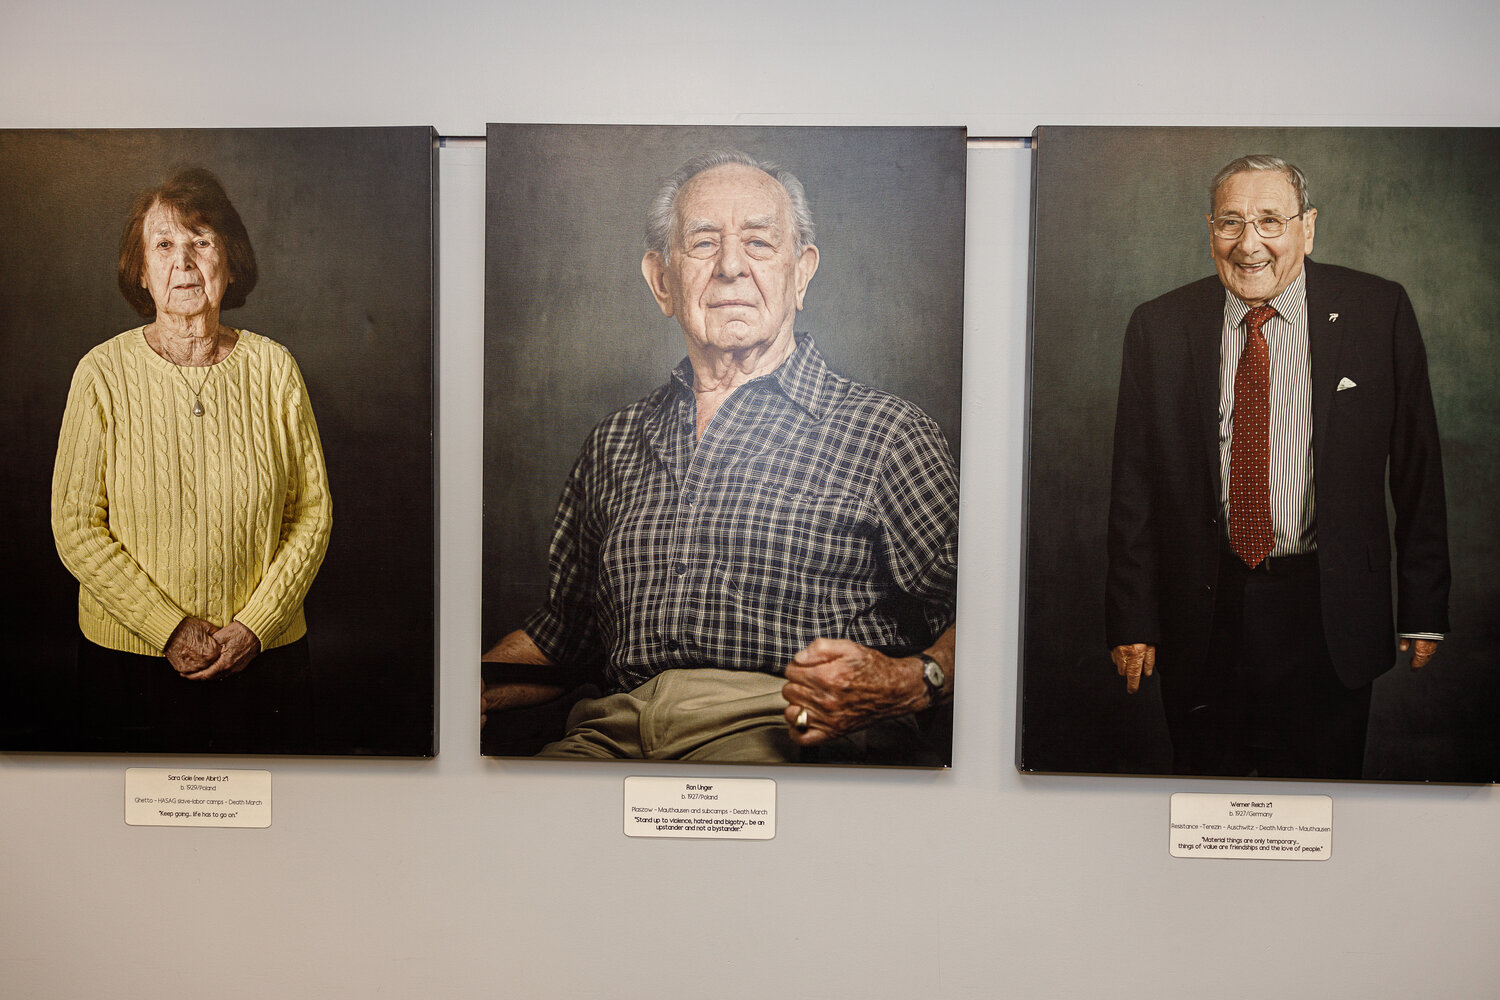 The exhibit was coordinated by Dinah Kramer, whose mother, Sara Gole, left, is included in it. Her photo is displayed alongside those of Ron Unger and Werner Reich.